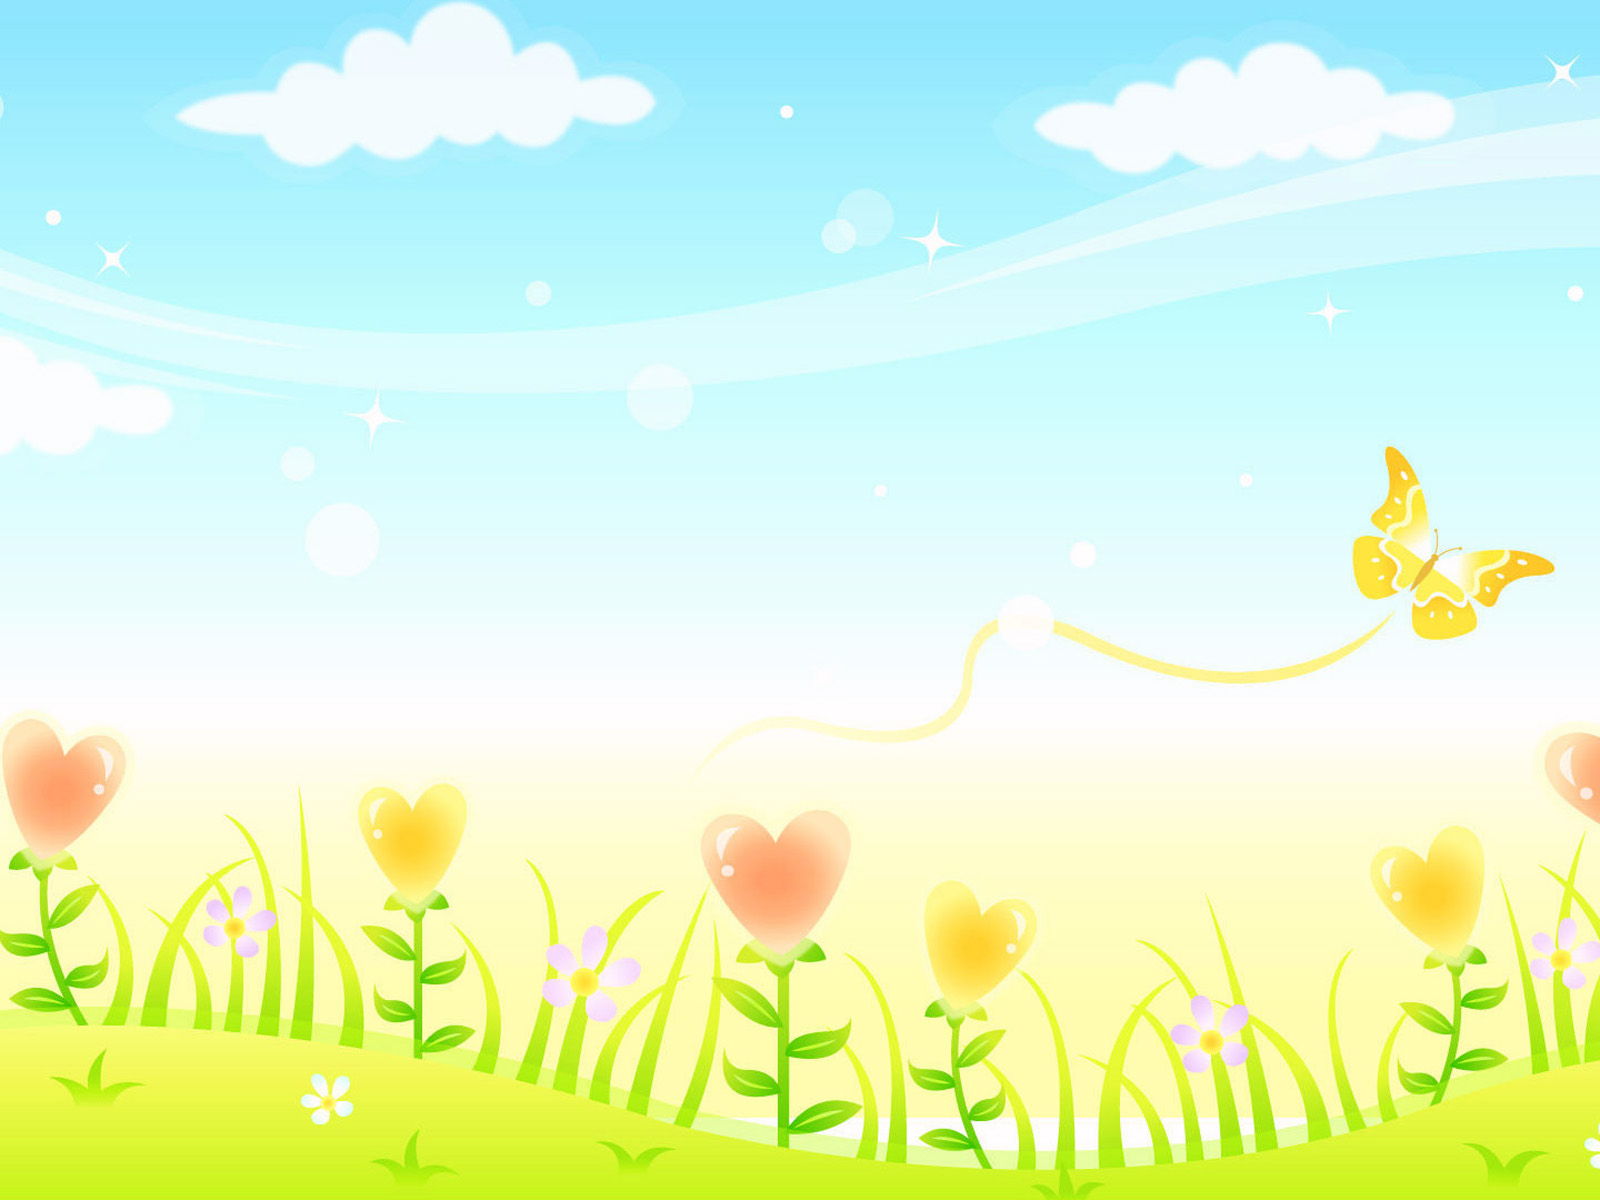 April 4 2013 PPT Backgrounds   Powerpoint Backgrounds